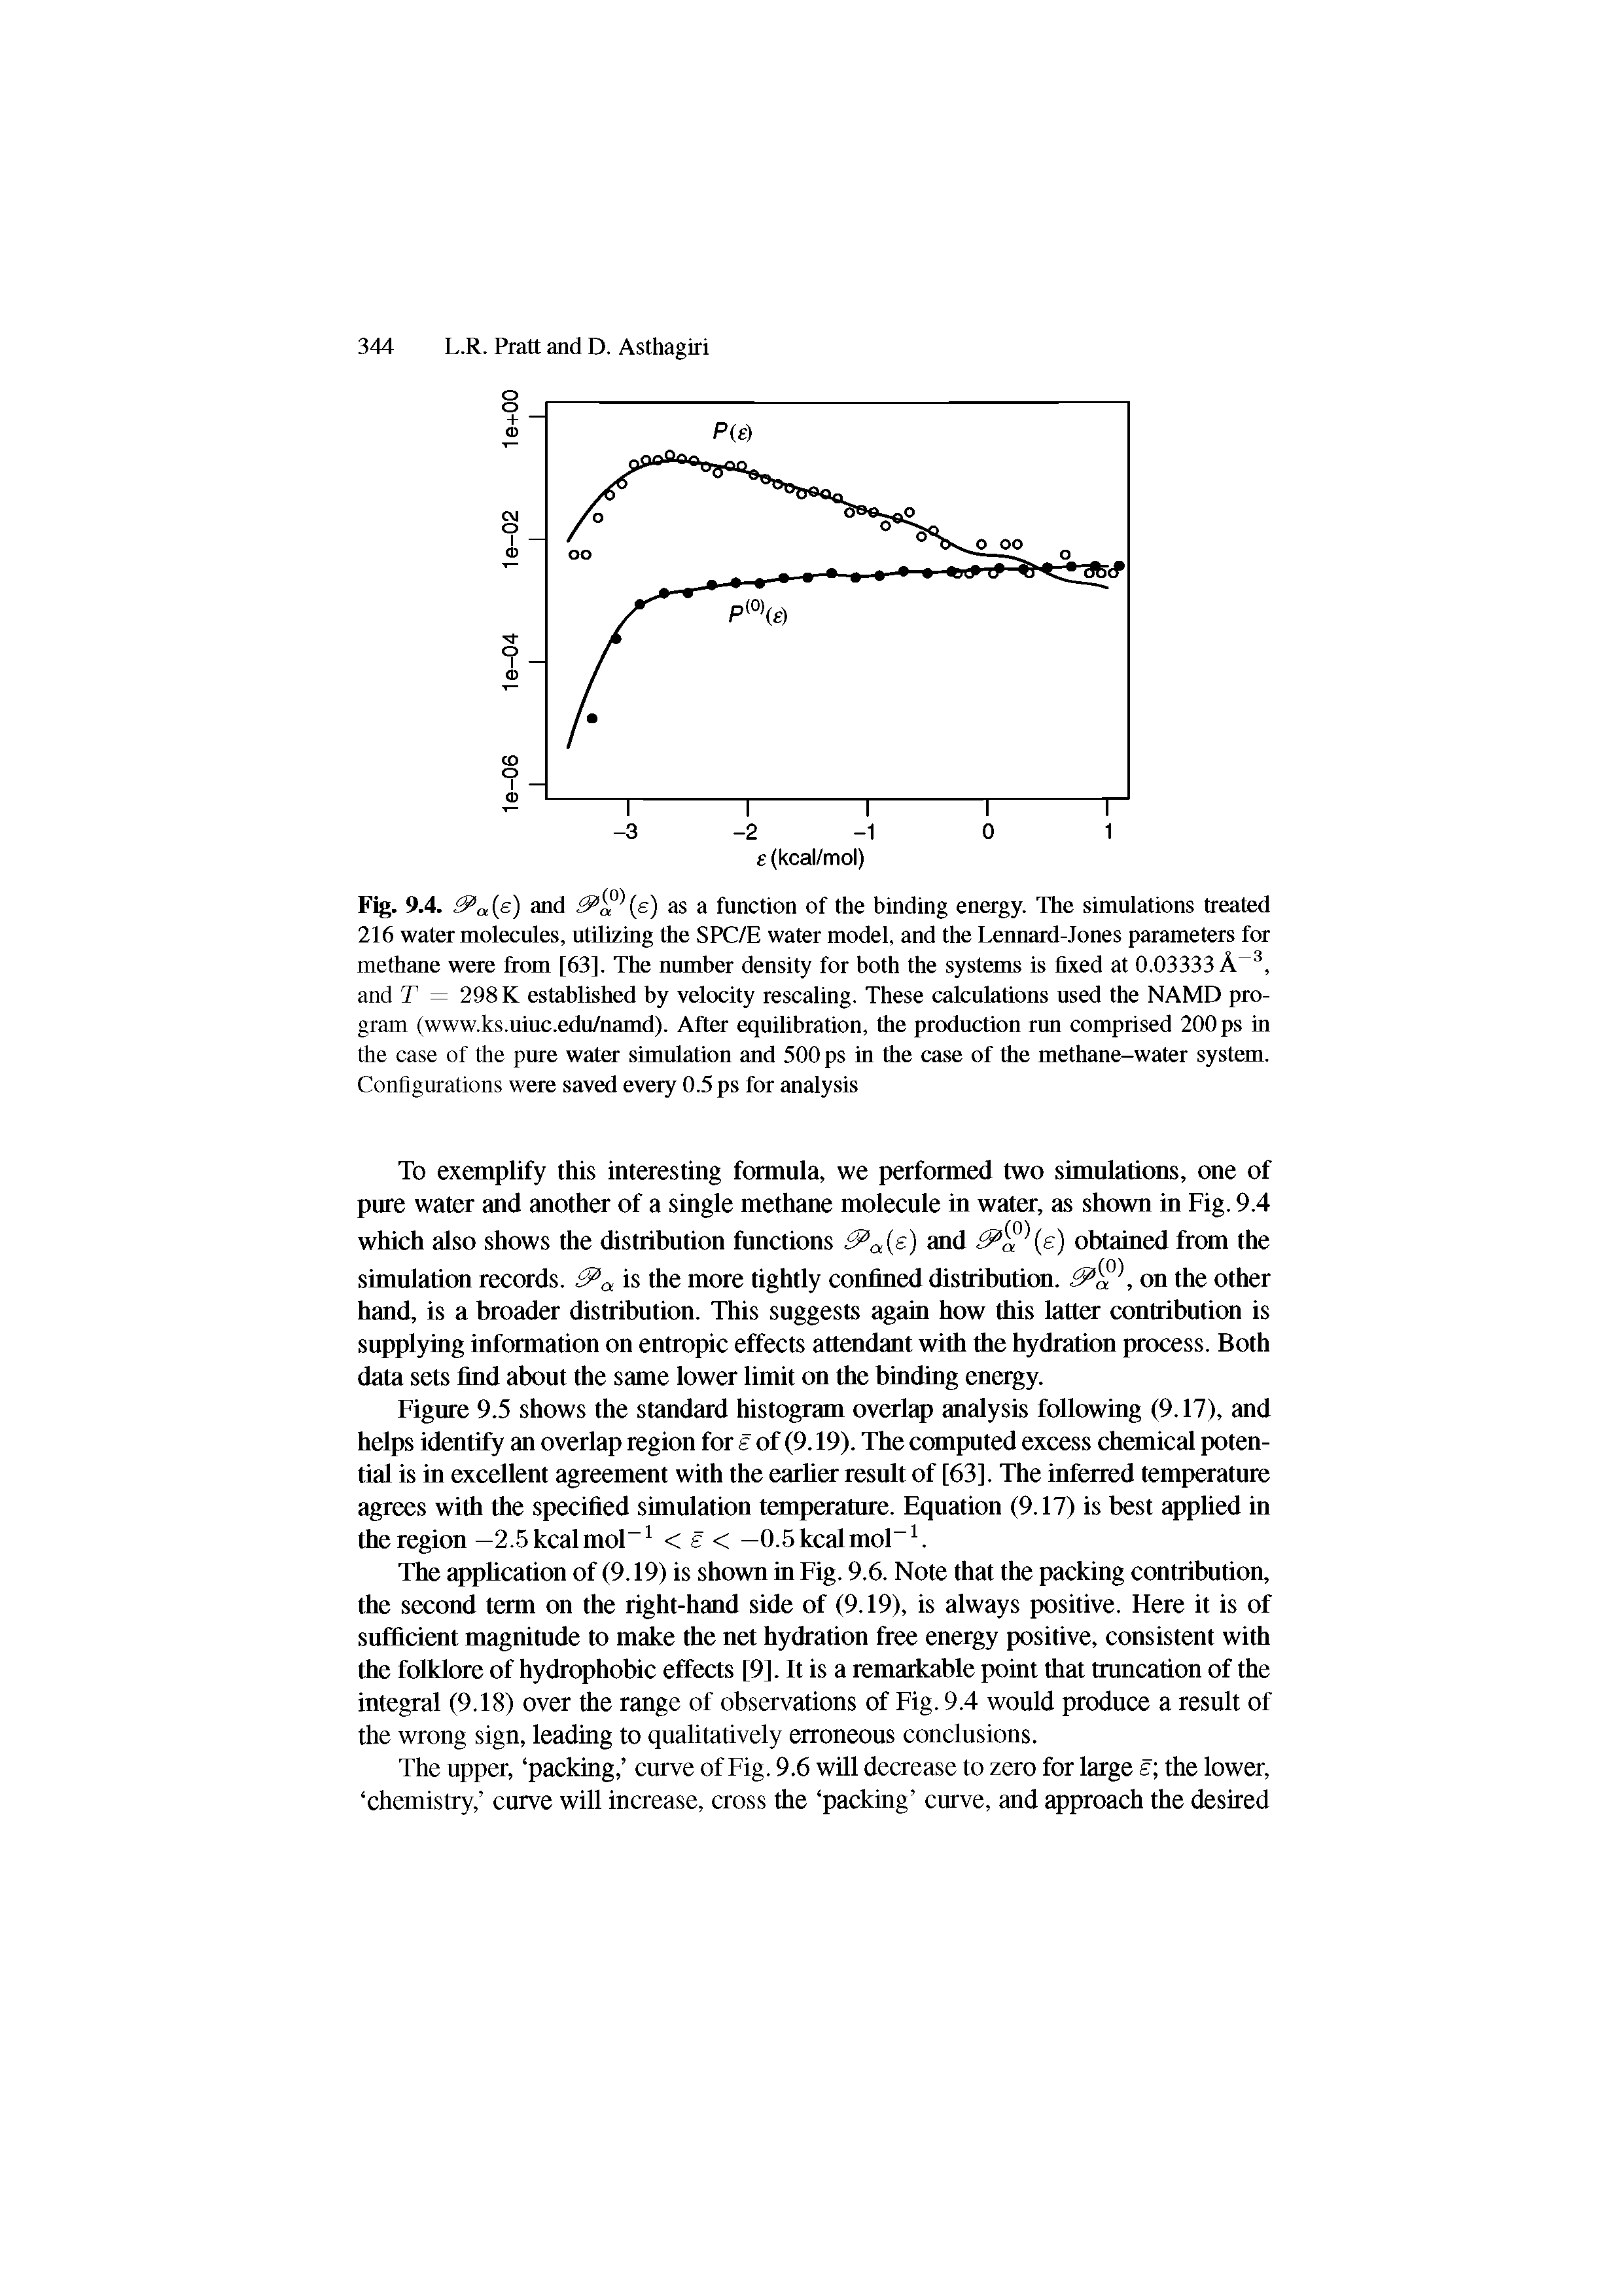 Fig. 9.4. Pa (e) and (e) as a function of the binding energy. The simulations treated 216 water molecules, utilizing the SPC/E water model, and the Lennard-Jones parameters for methane were from [63]. The number density for both the systems is fixed at 0.03333 A 3, and T = 298 K established by velocity rescaling. These calculations used the NAMD program (www.ks.uiuc.edu/namd). After equilibration, the production run comprised 200 ps in the case of the pure water simulation and 500 ps in the case of the methane-water system. Configurations were saved every 0.5 ps for analysis...